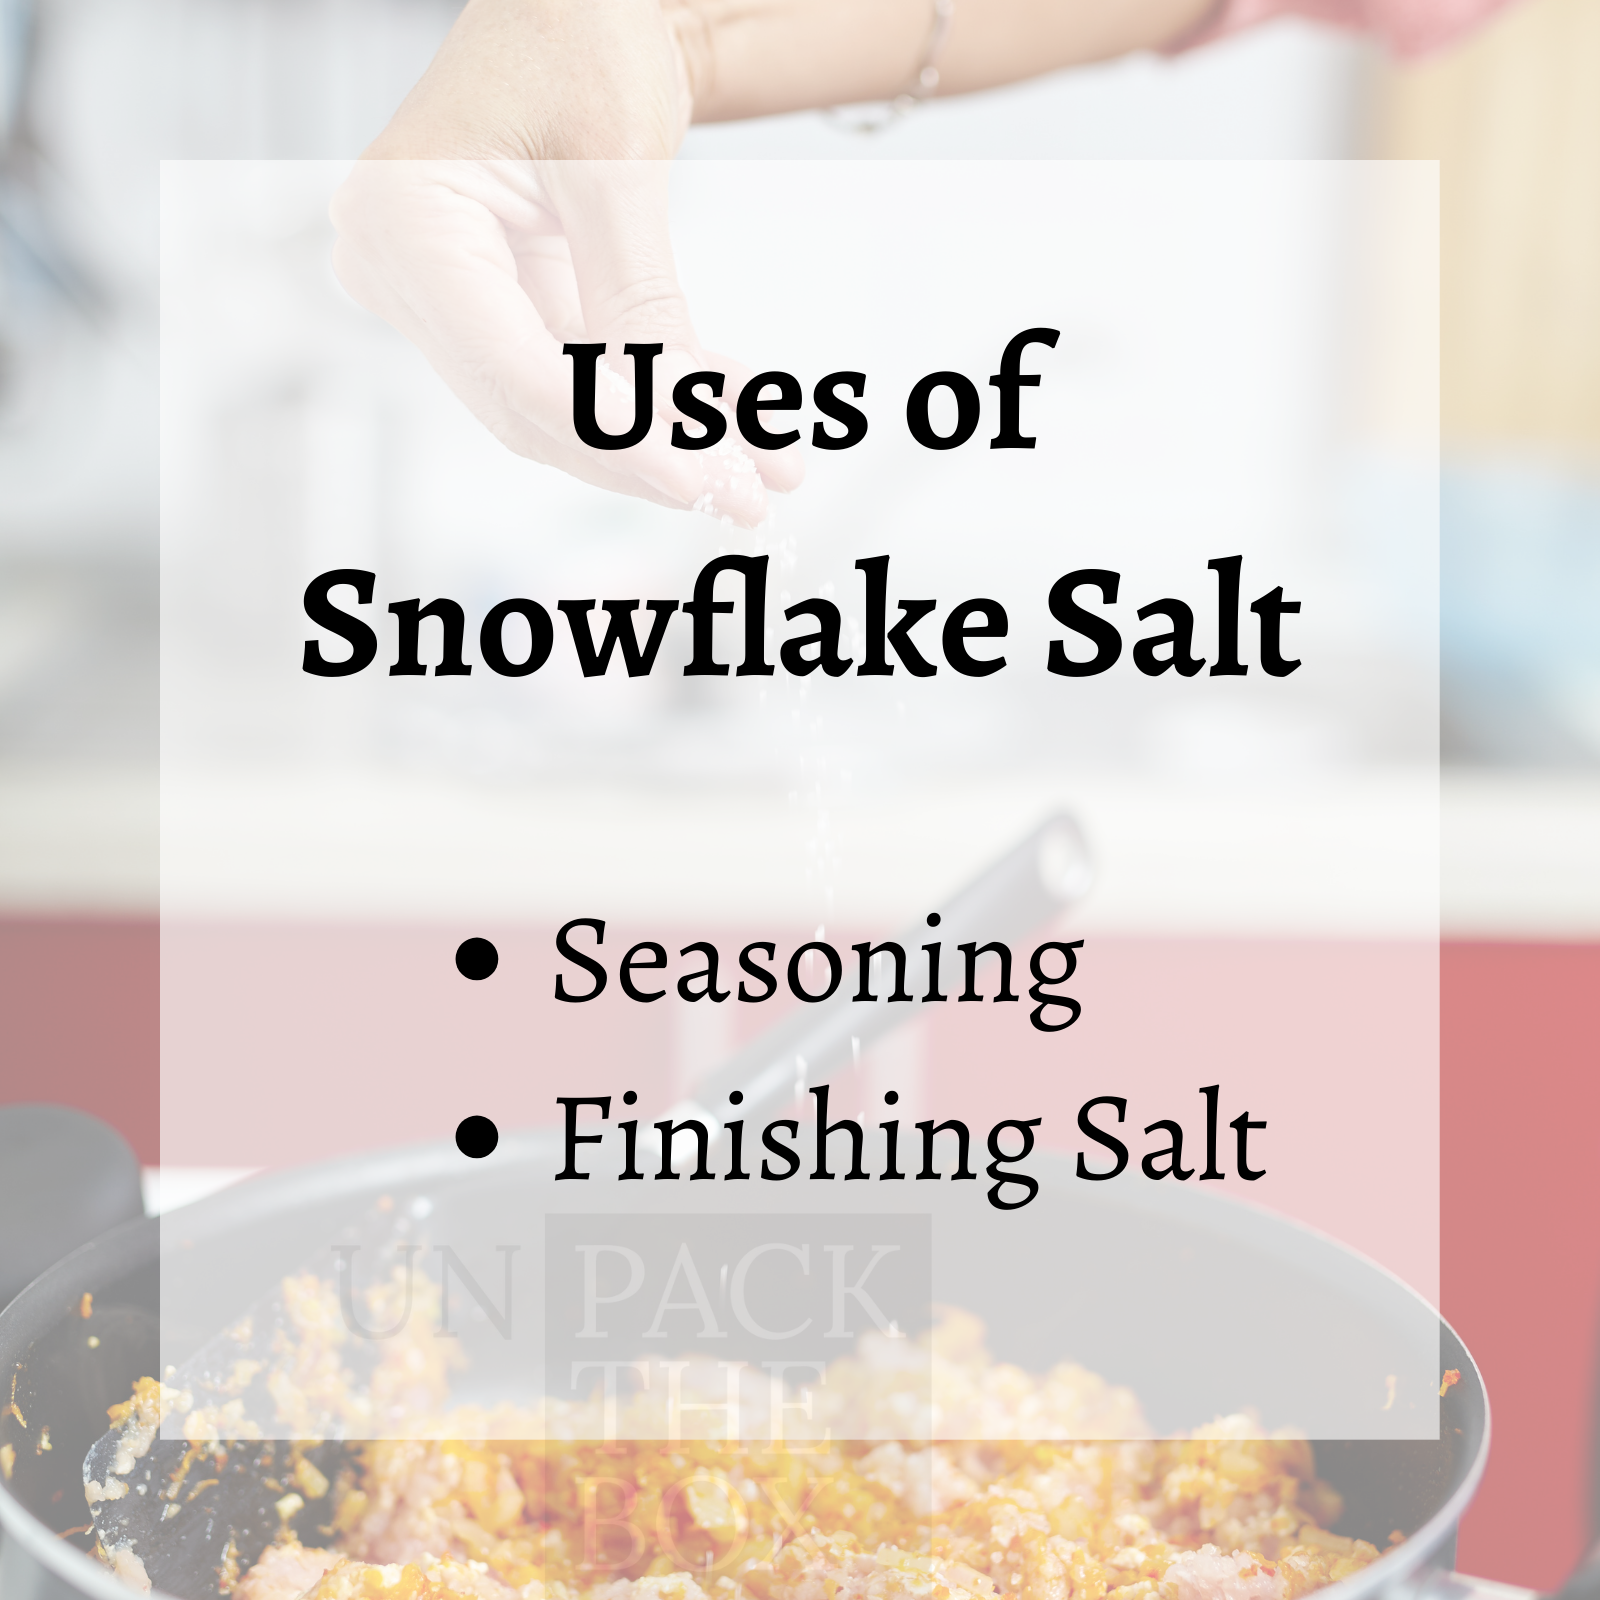 Baker & Baker Gourmet Snowflake Salt can be used as seasoning and finishing salt, a satisfying addition to many foods